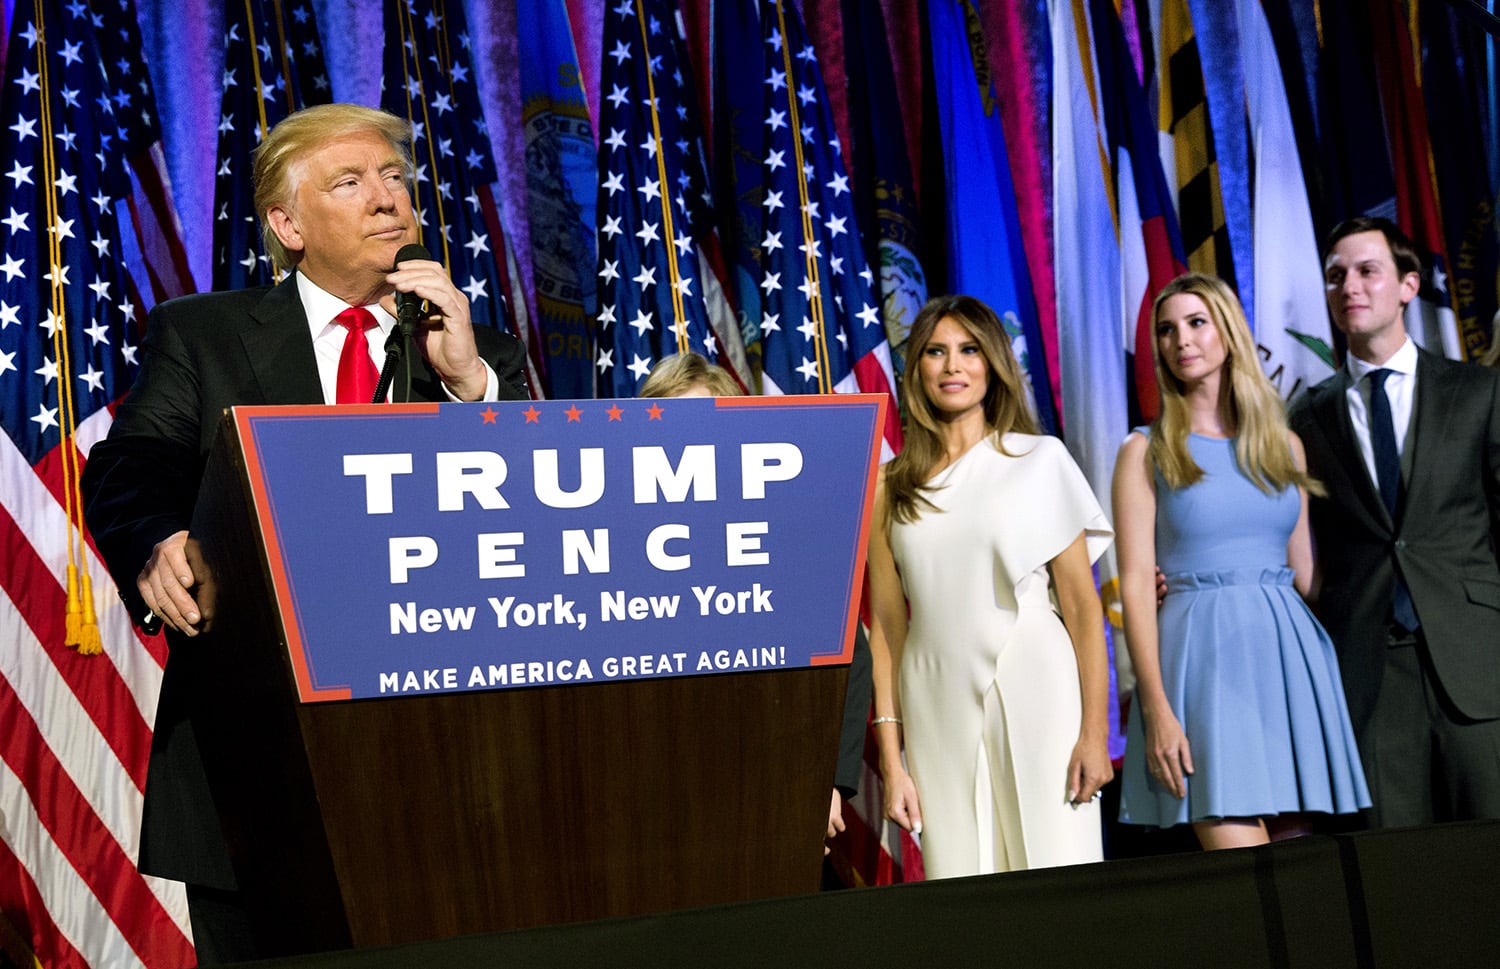 President-elect Donald J. Trump, wife Melania, daughter Ivanka, and son-in-law Jared Kushner, in the Hilton Ballroom after winning the election, New York City, Nov. 9, 2016